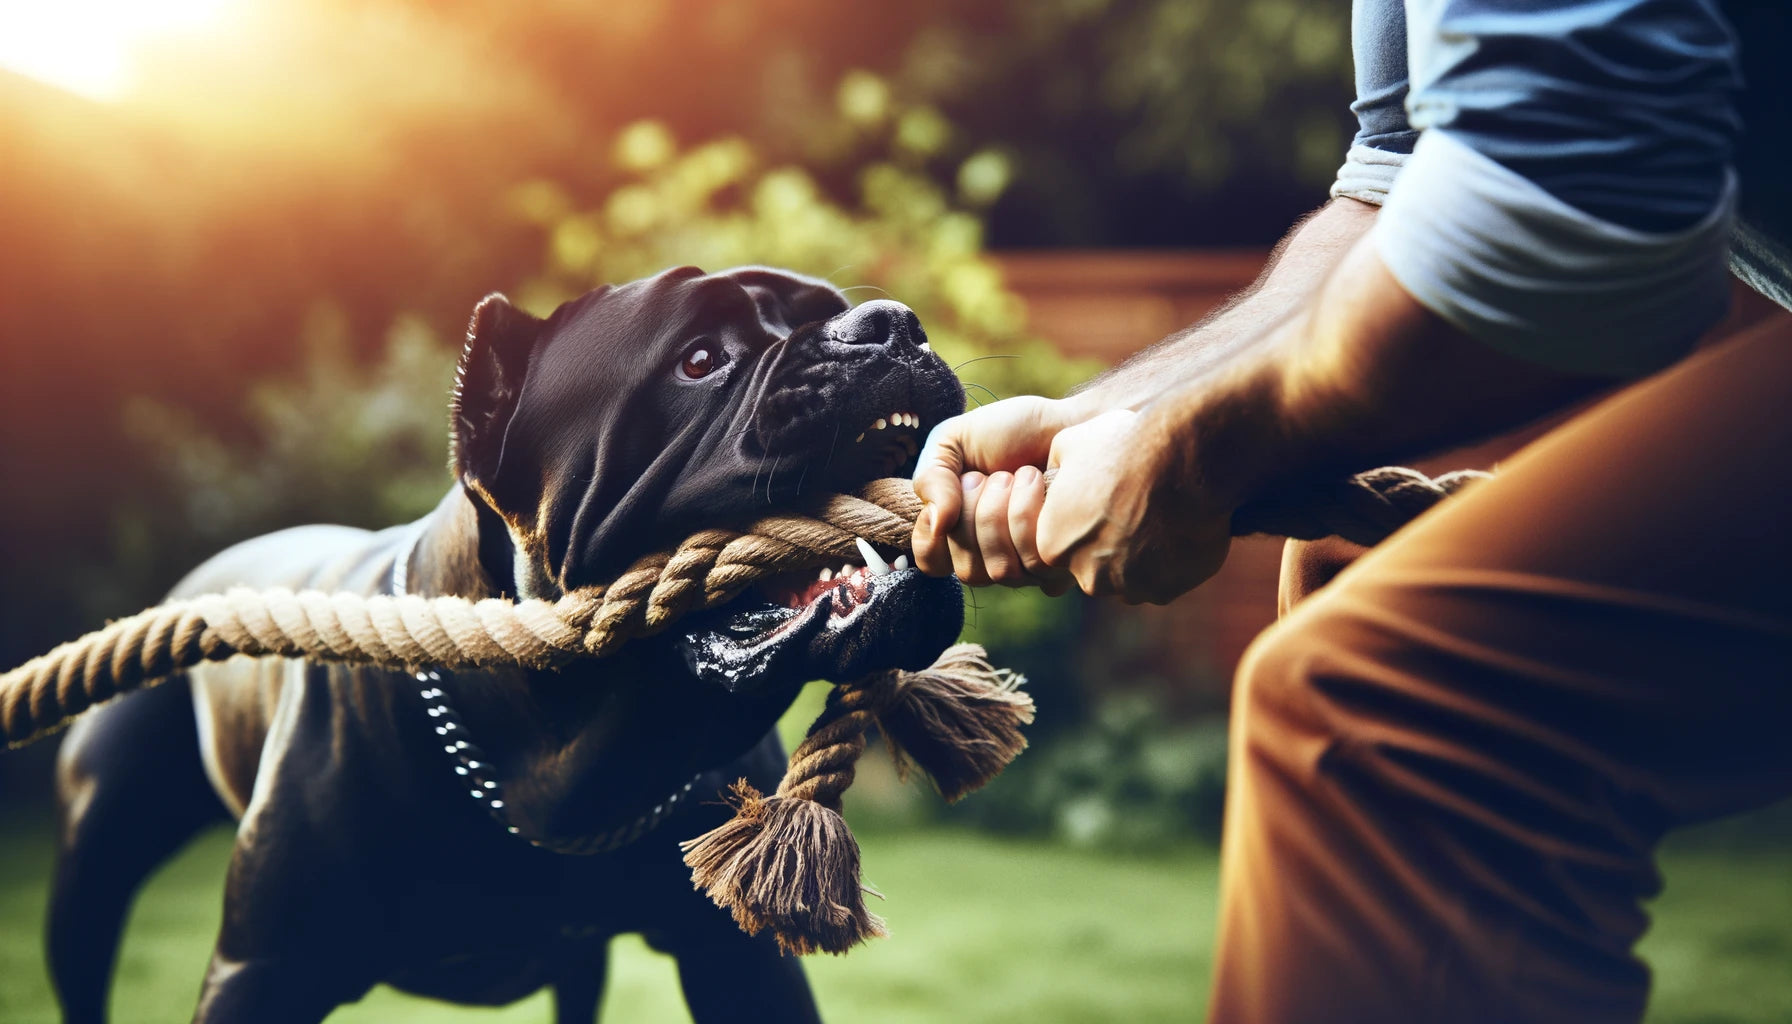 Cane Corso playing tug-of-war with its owner, gripping a sturdy rope.